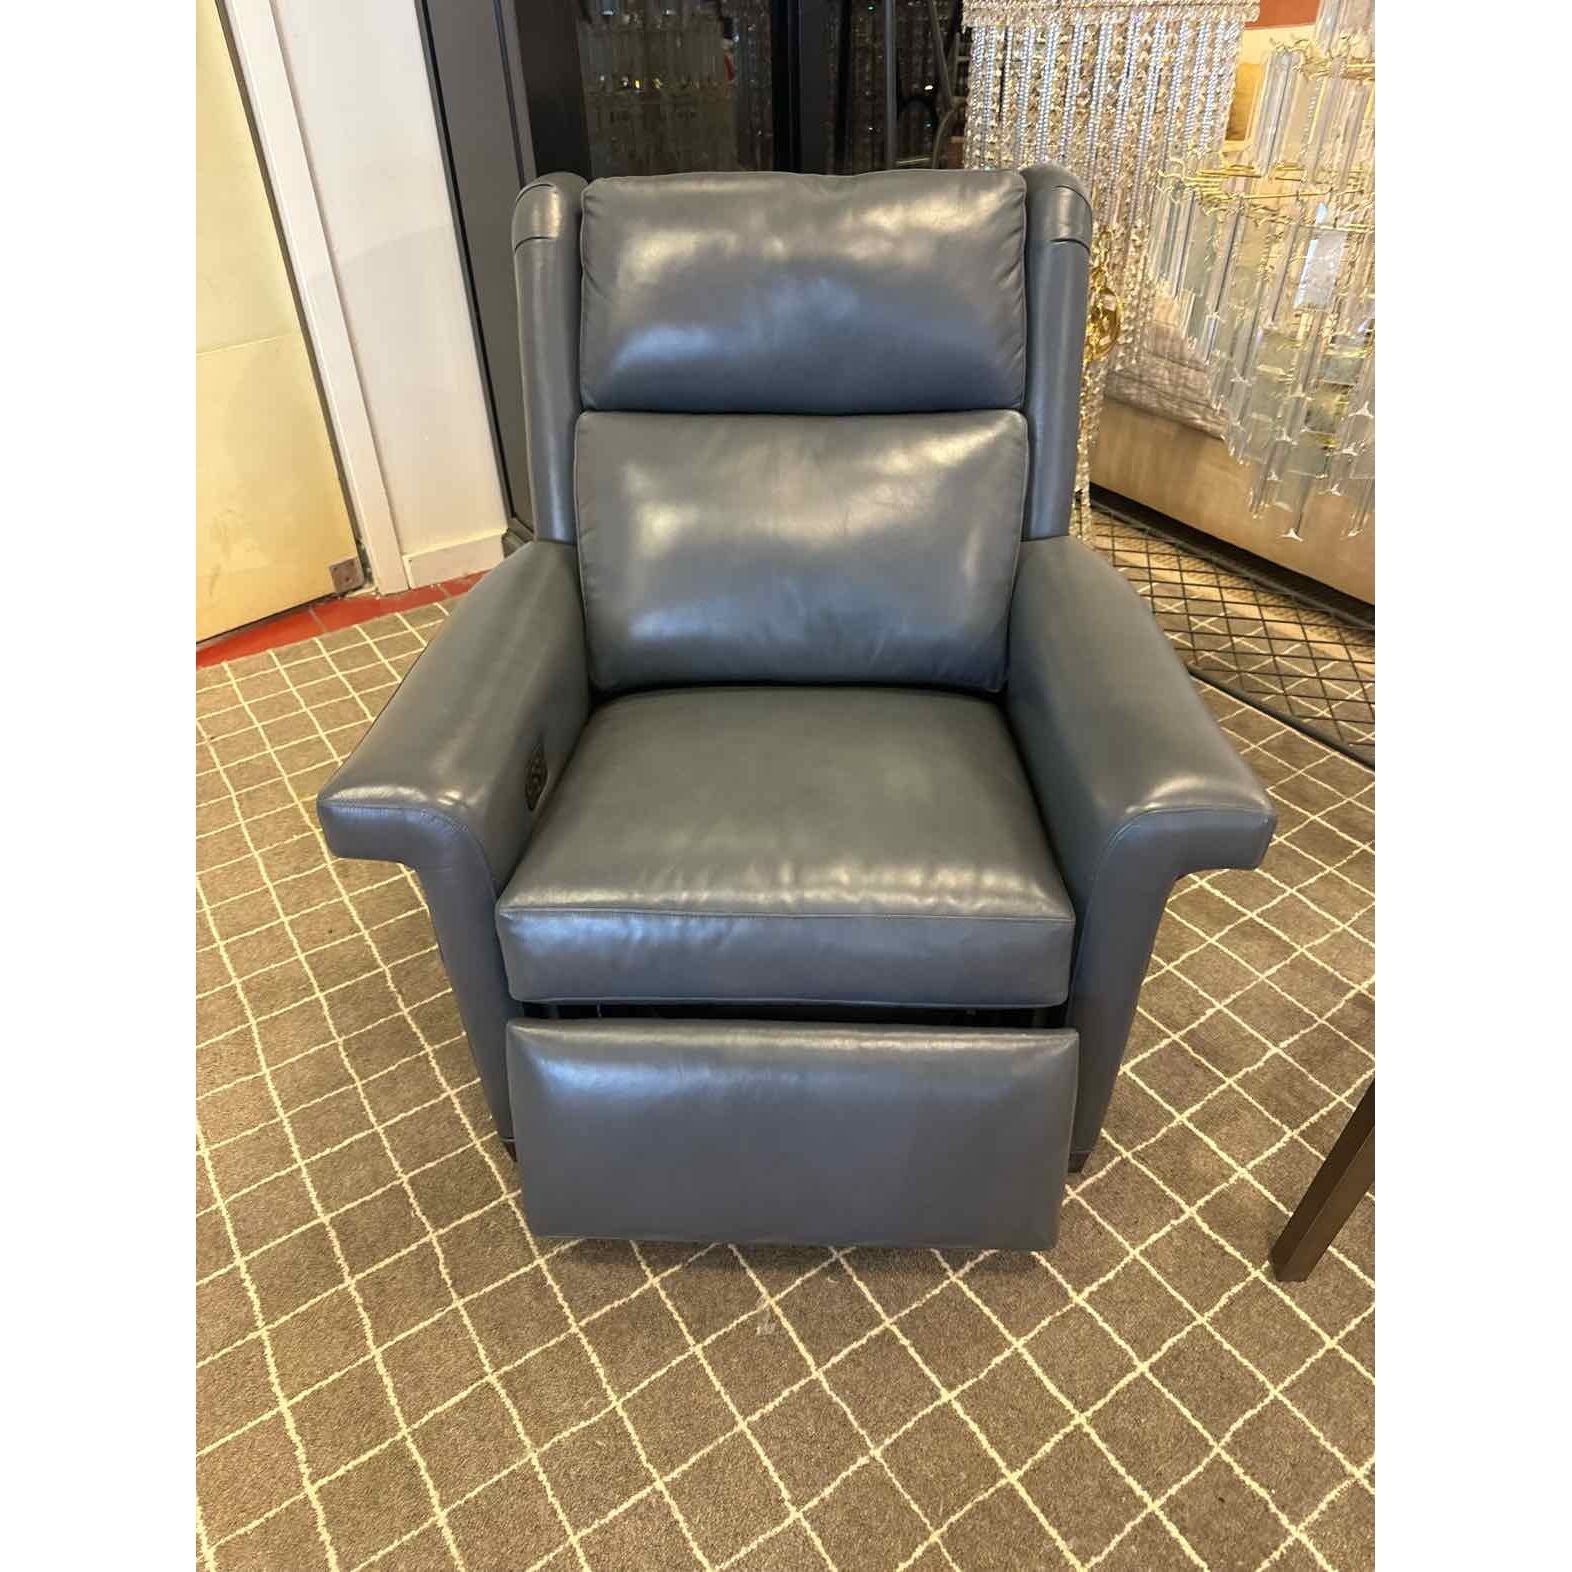 Hancock & Moore Leather Reclining Massage Chair in Grey 37"W x 39"D x 40"H